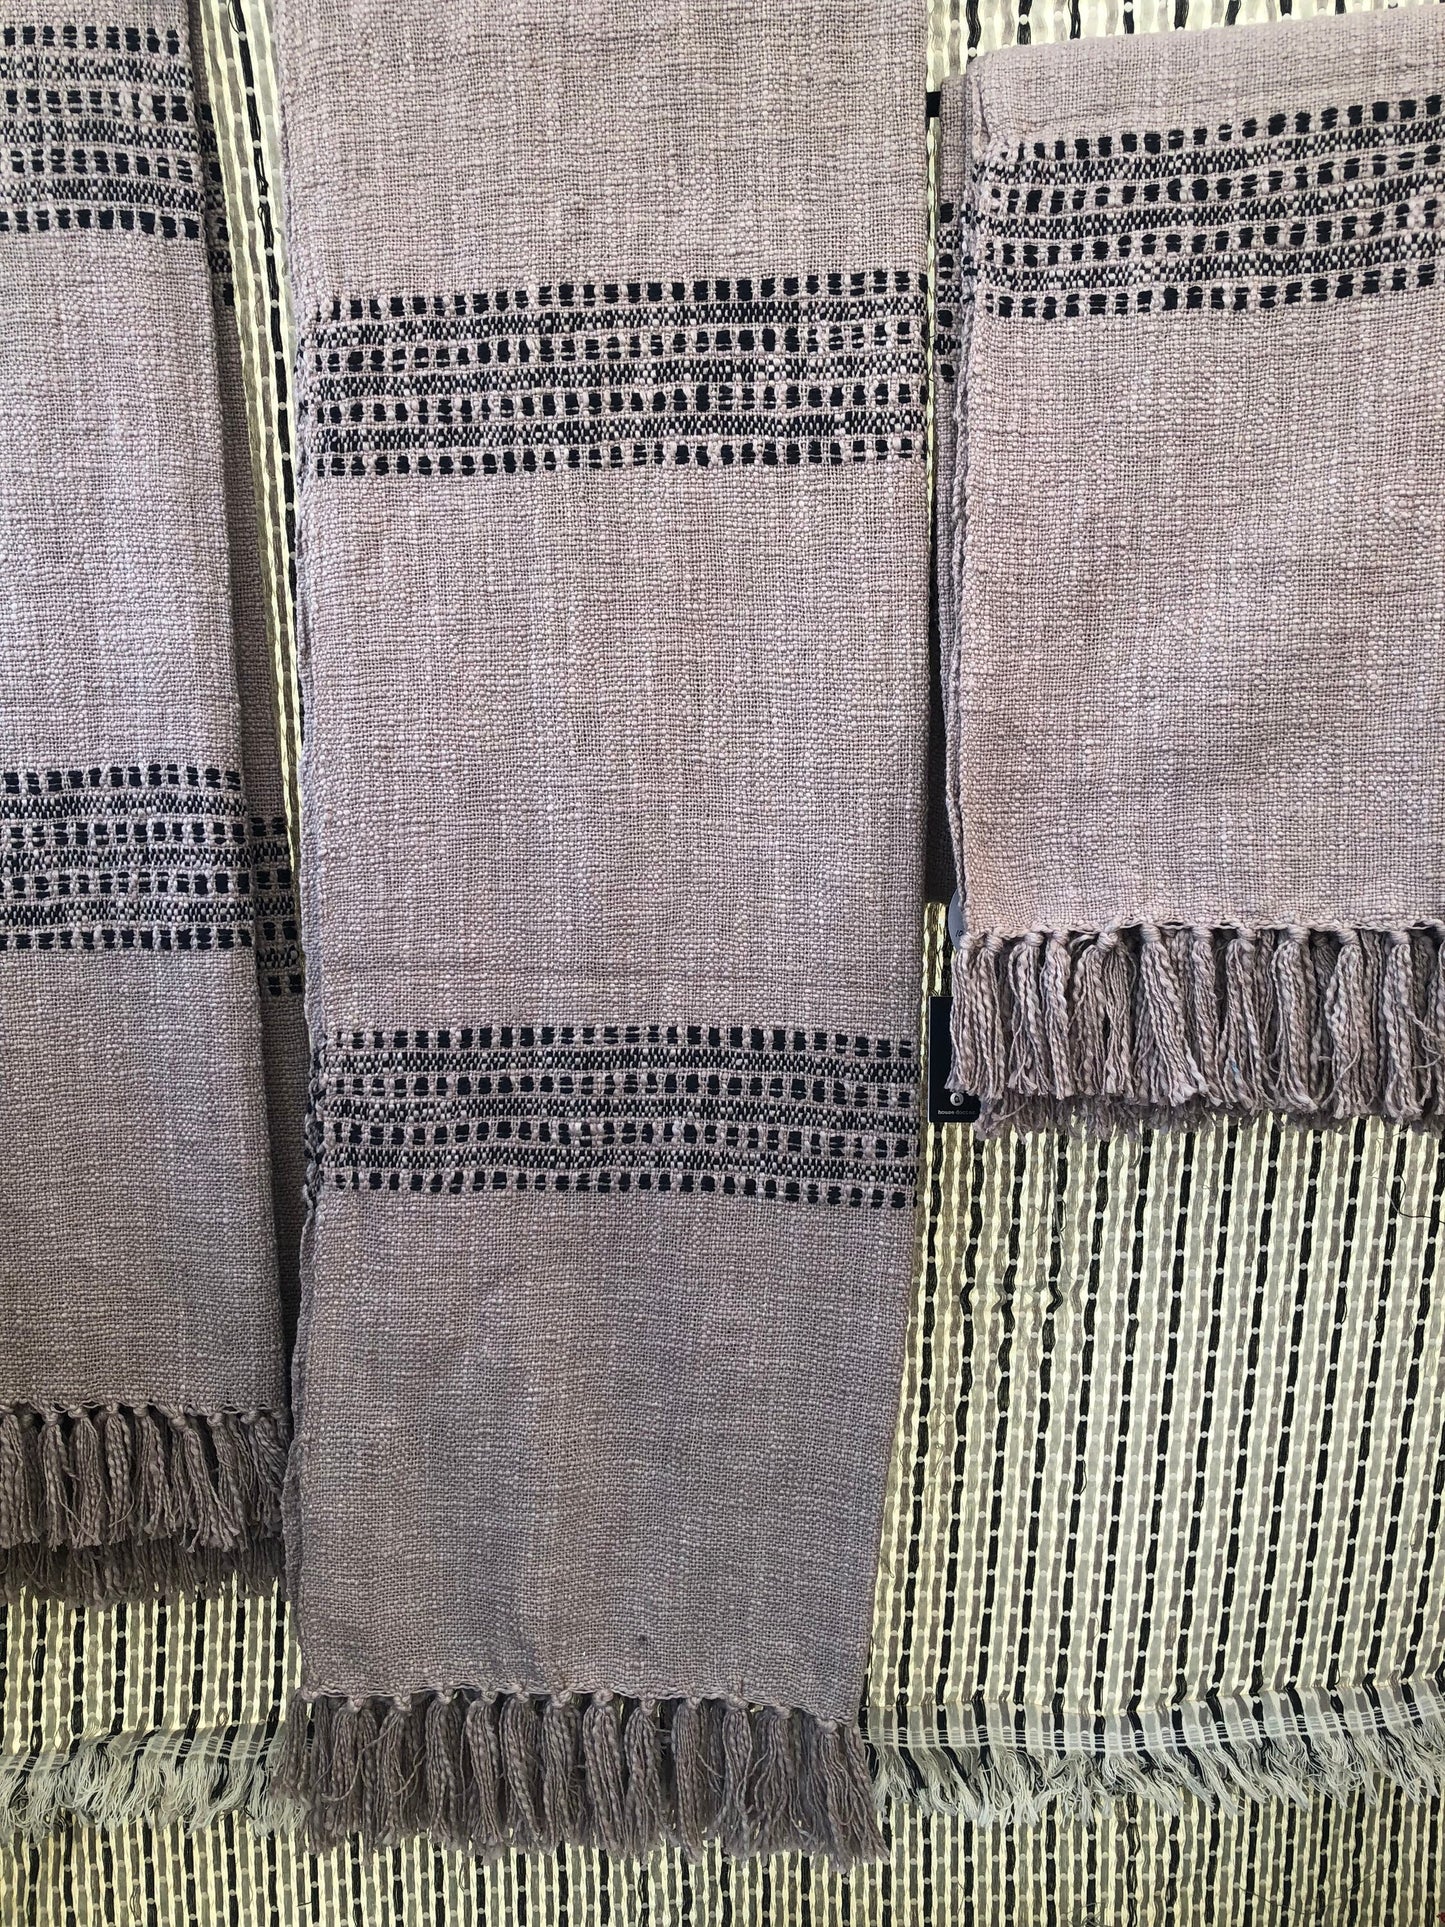 100% Cotton Handwoven Thrown from India